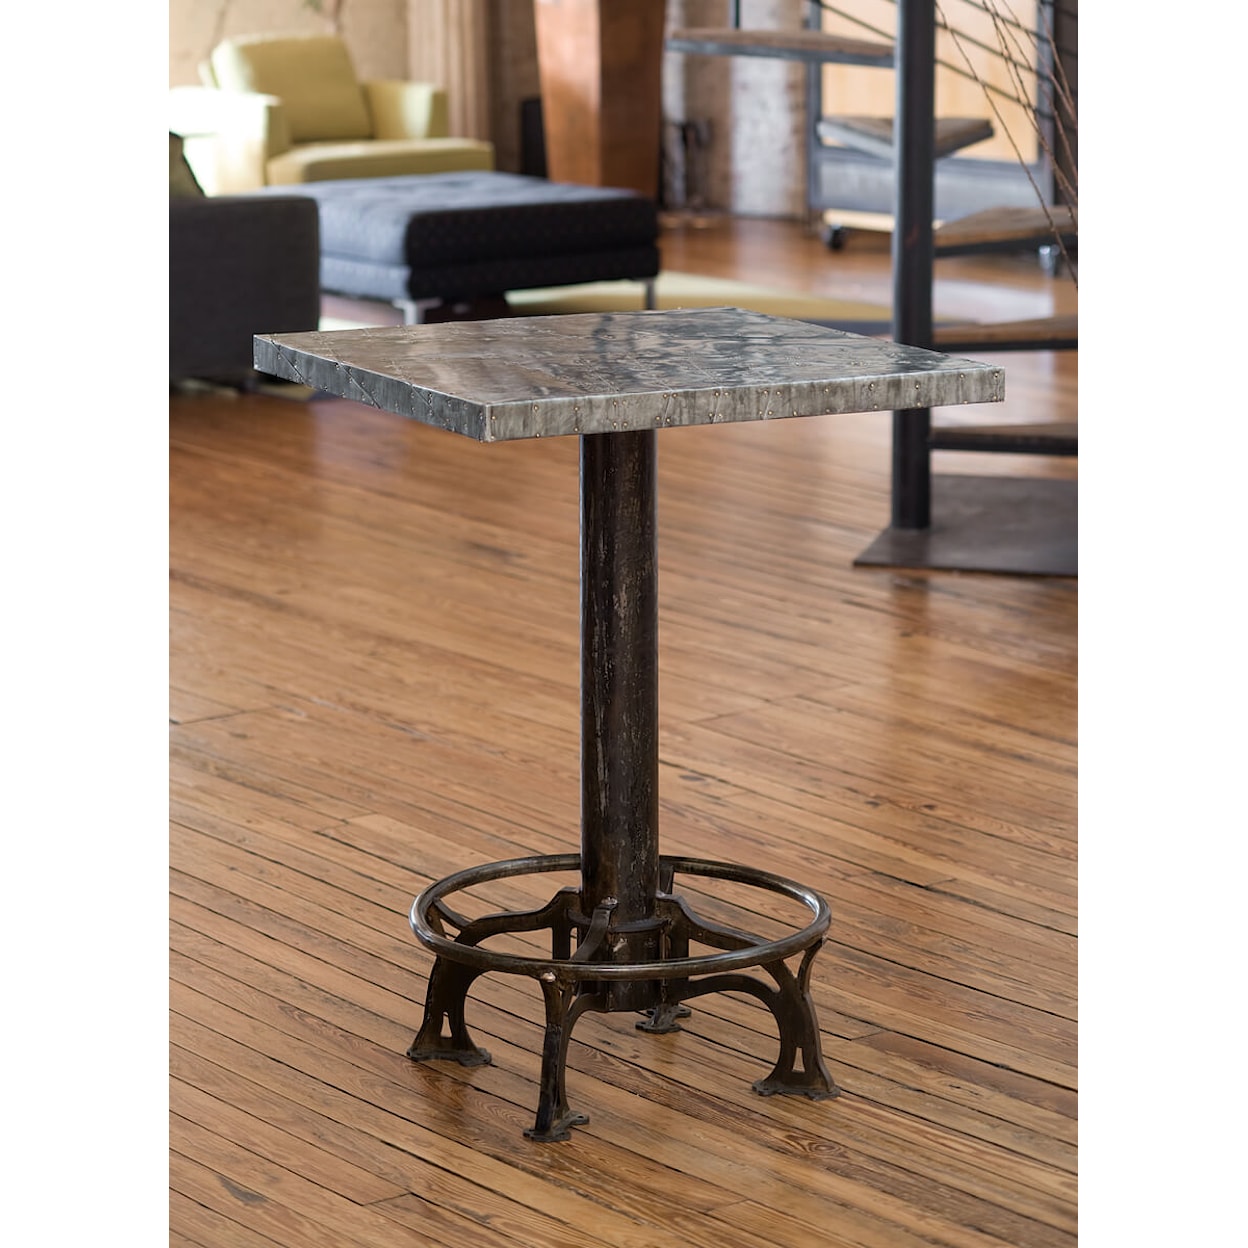 Regina-Andrew Design Regina-Andrew Design Zinc Cafe Table with Frankenstein Top